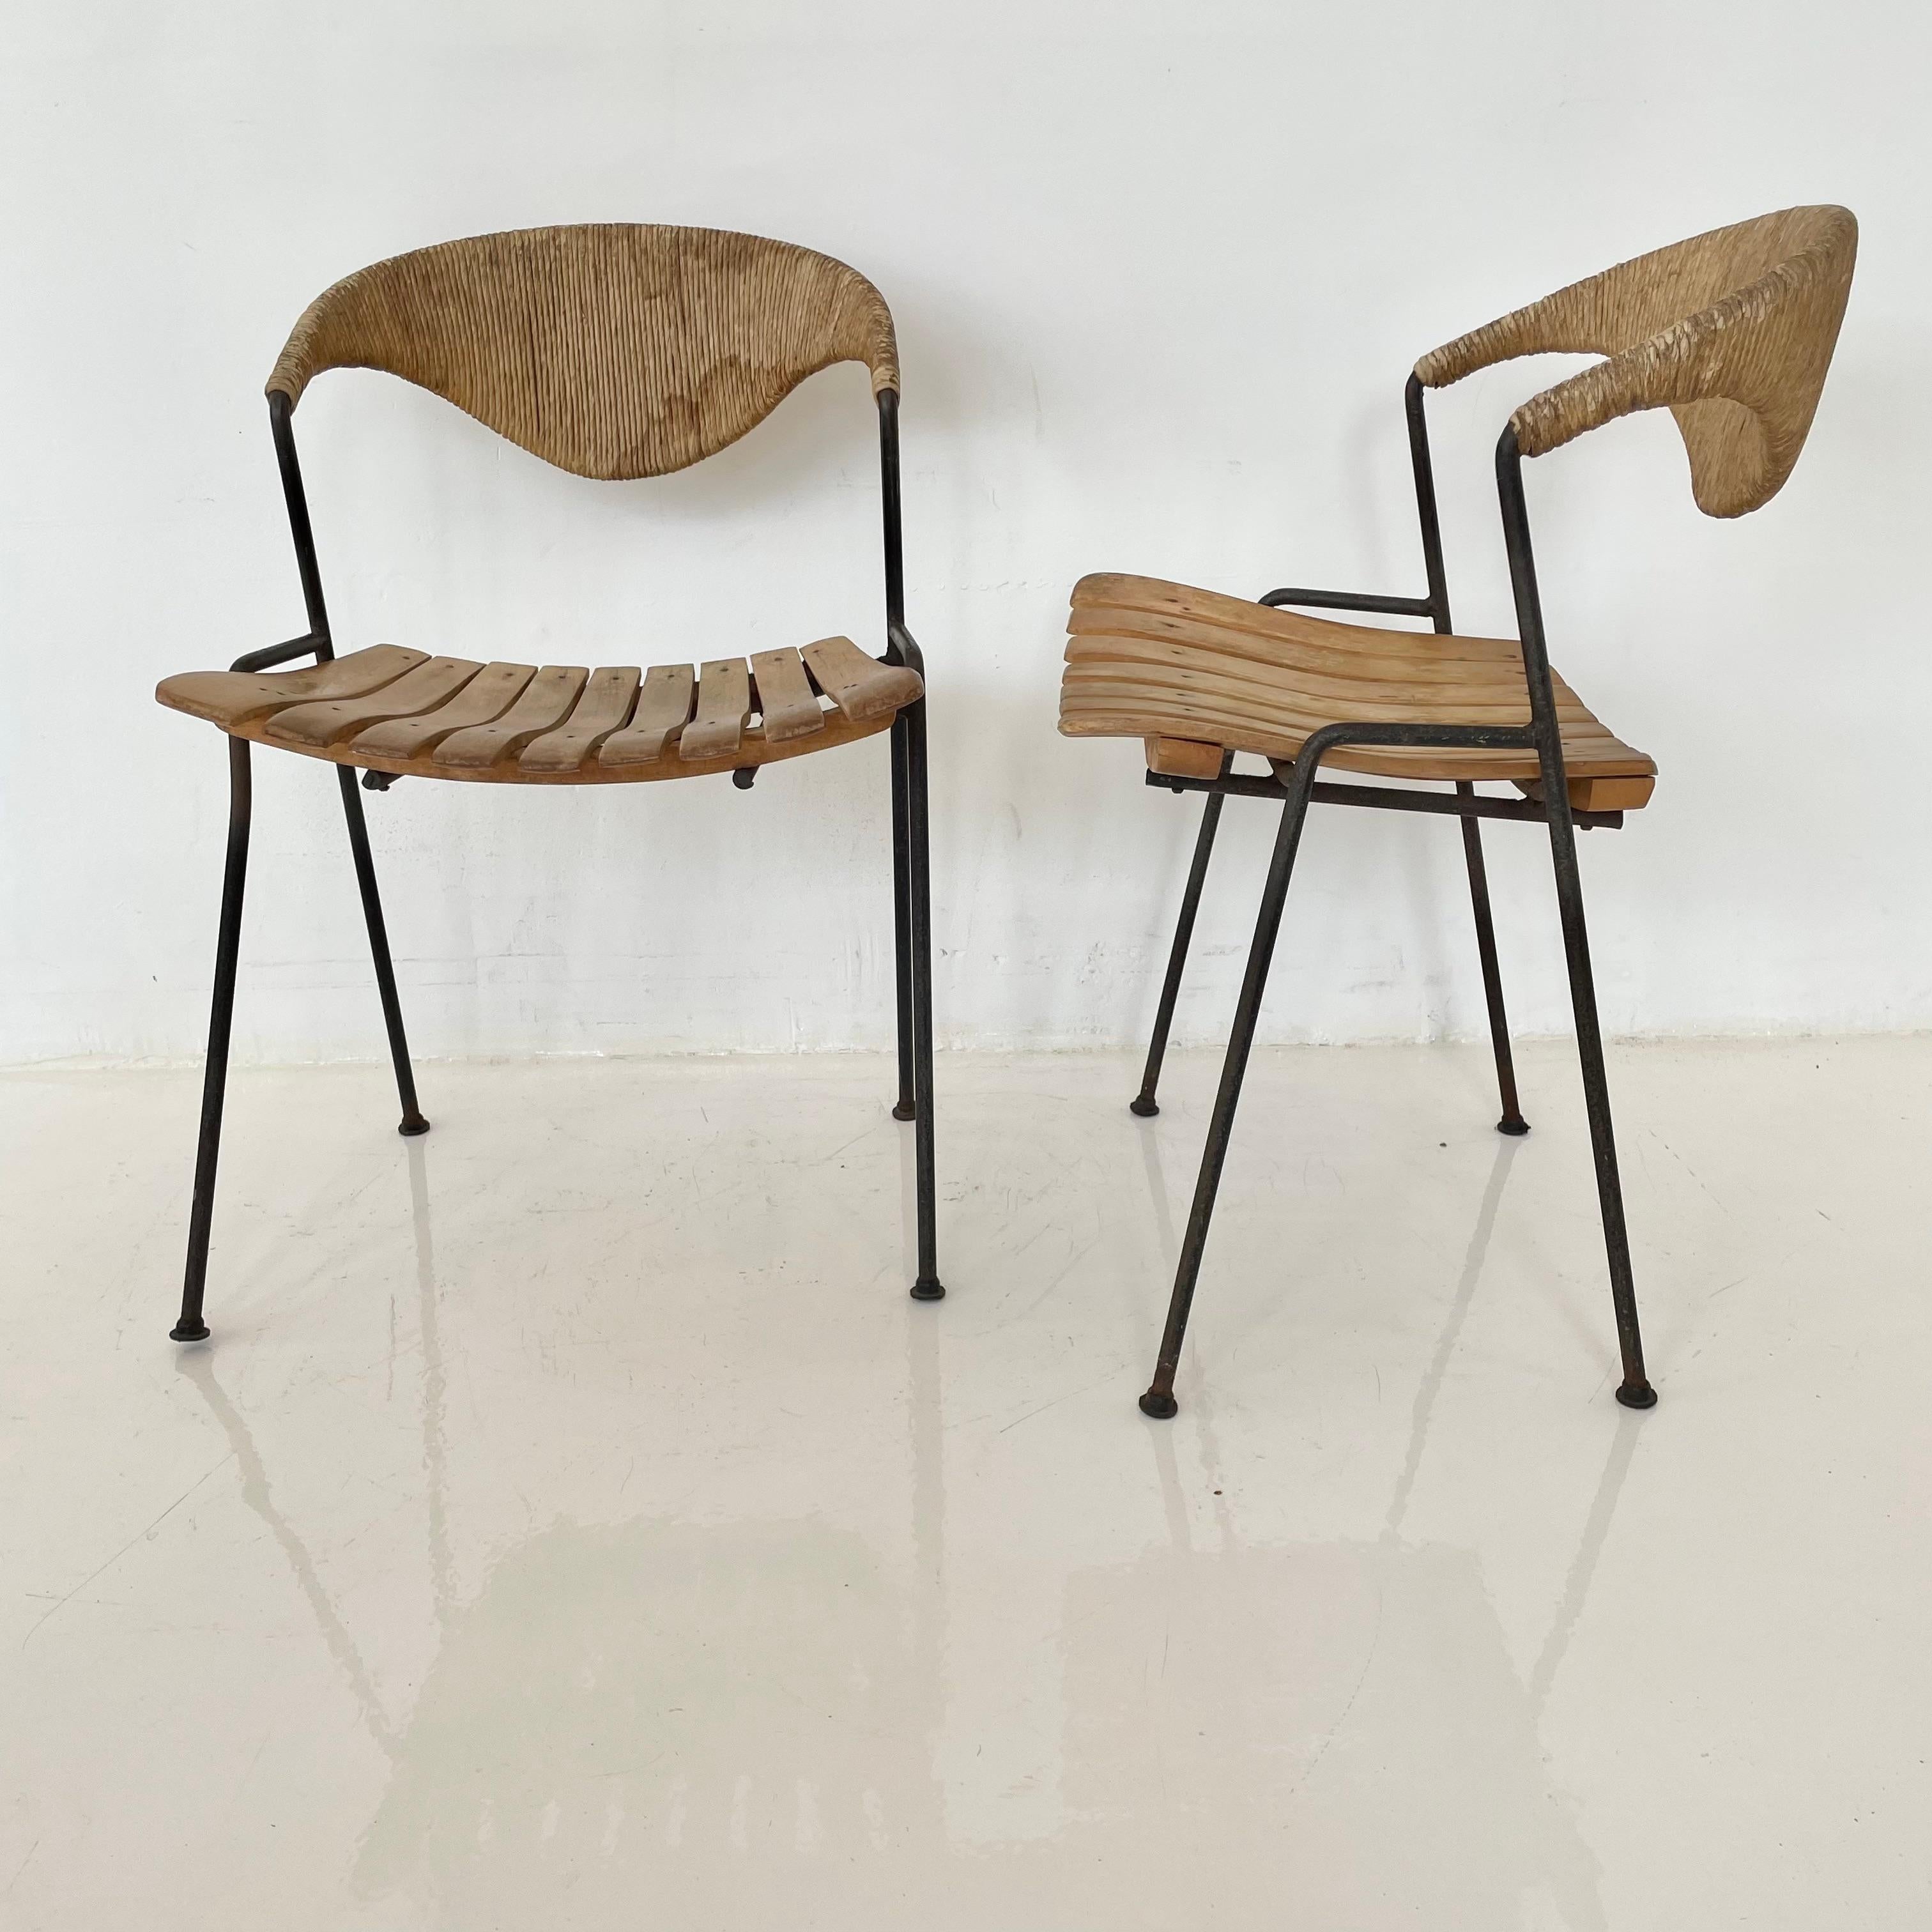 Mid-20th Century Arthur Umanoff Wood and Rush Sculptural Chairs For Sale